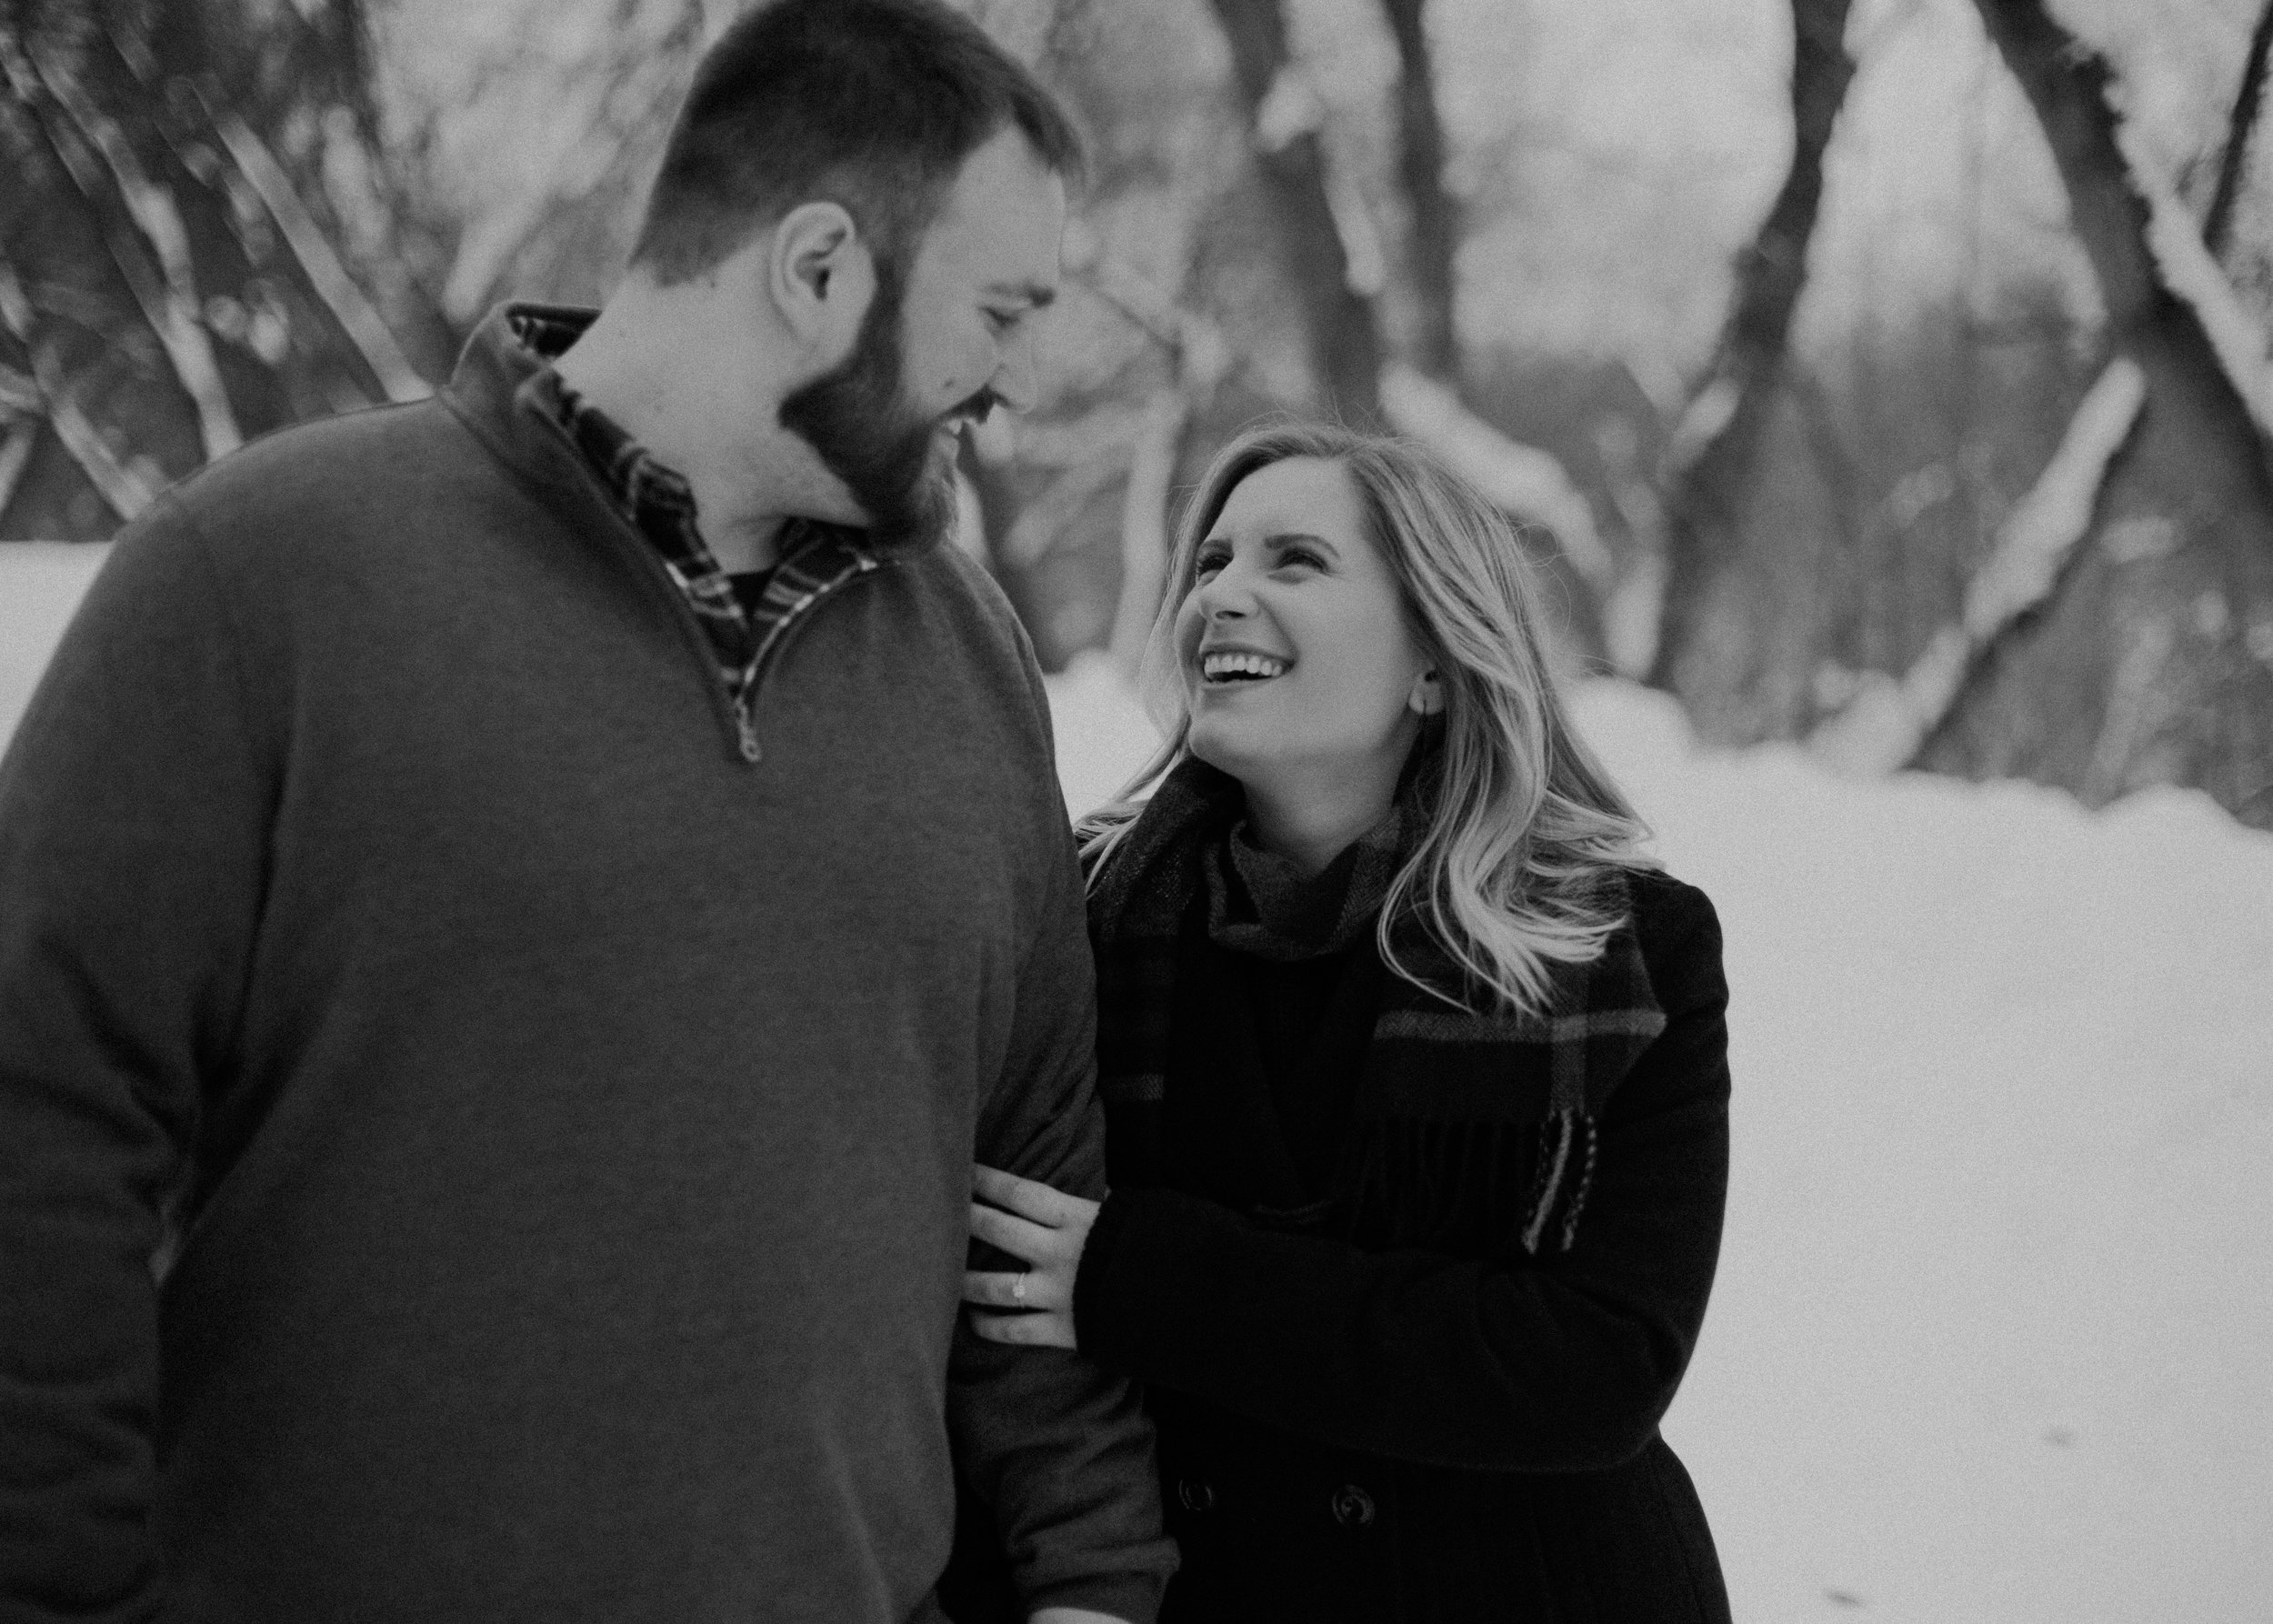  winter wonderland engagement session in Athens WI in February 